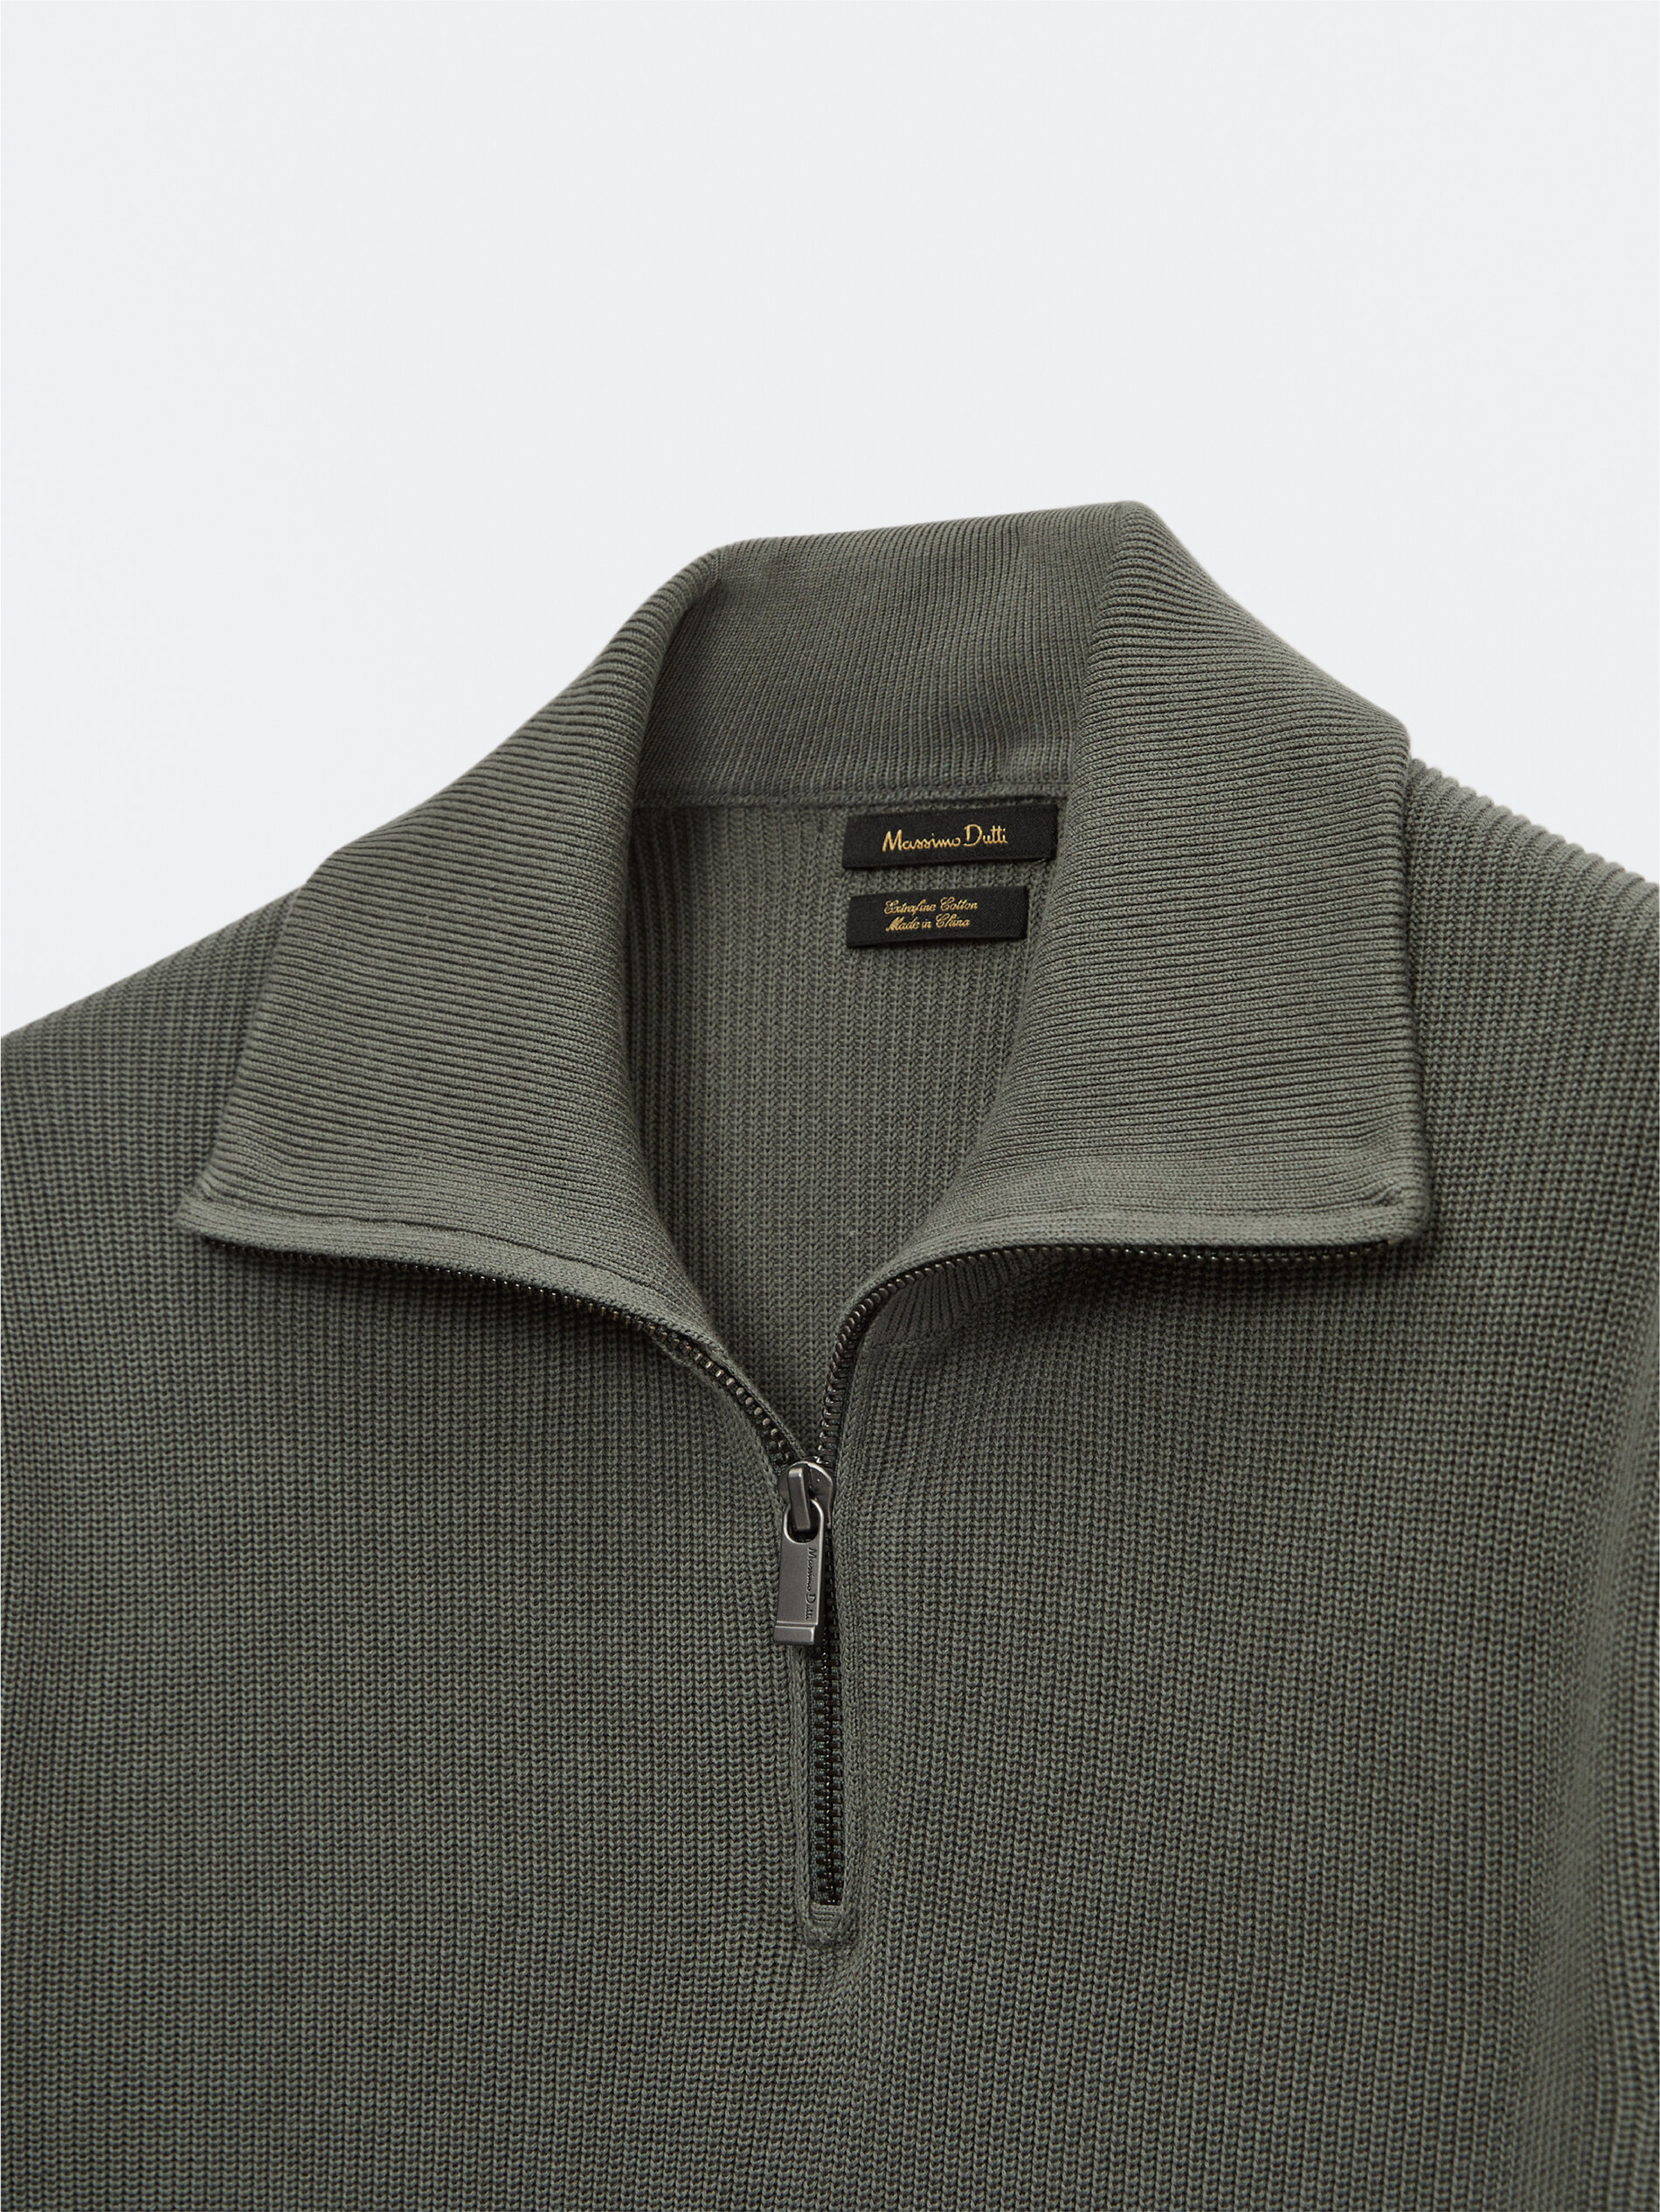 Massimo Dutti - Cotton mock neck sweater with zip fastening